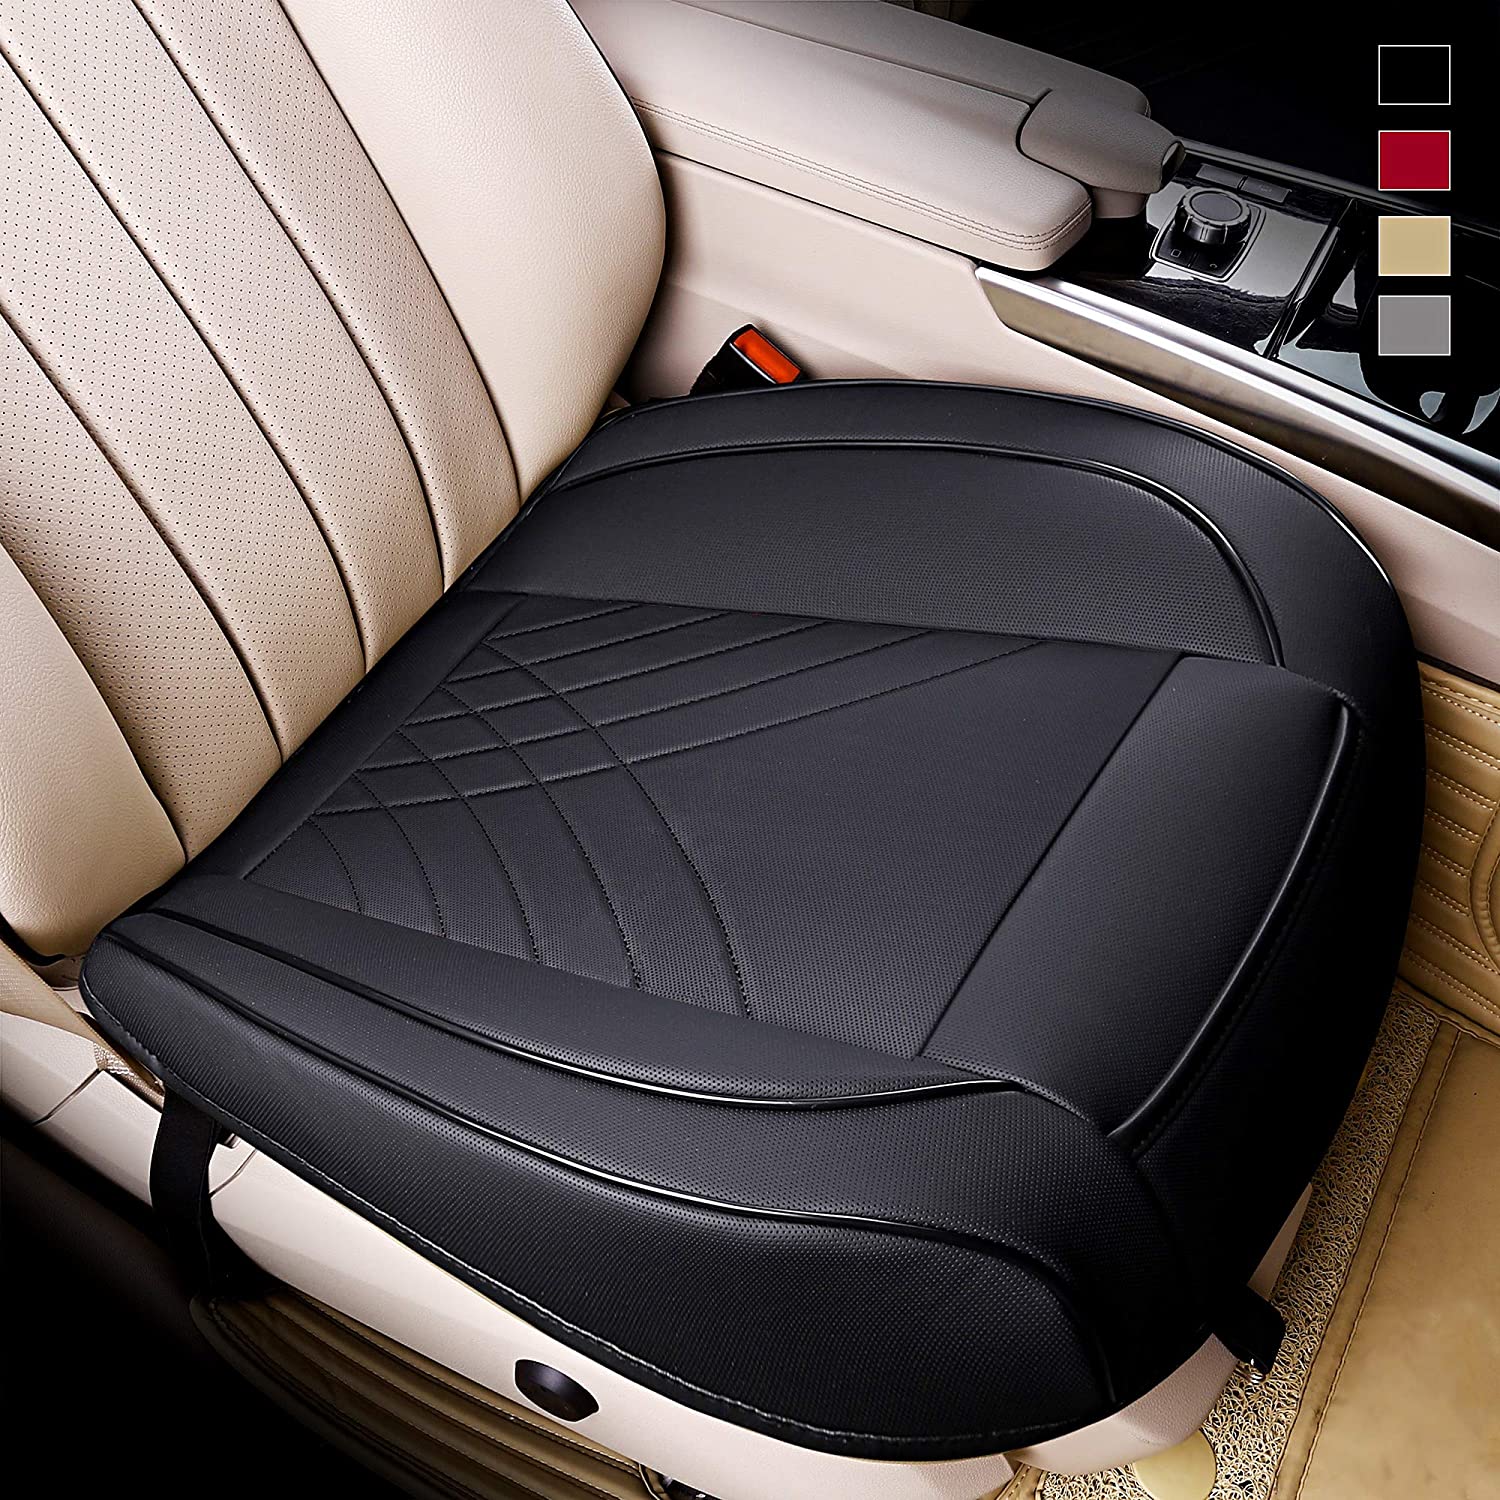 kingphenix Premium PU Car Seat Cover - Front Seat Protector Works with